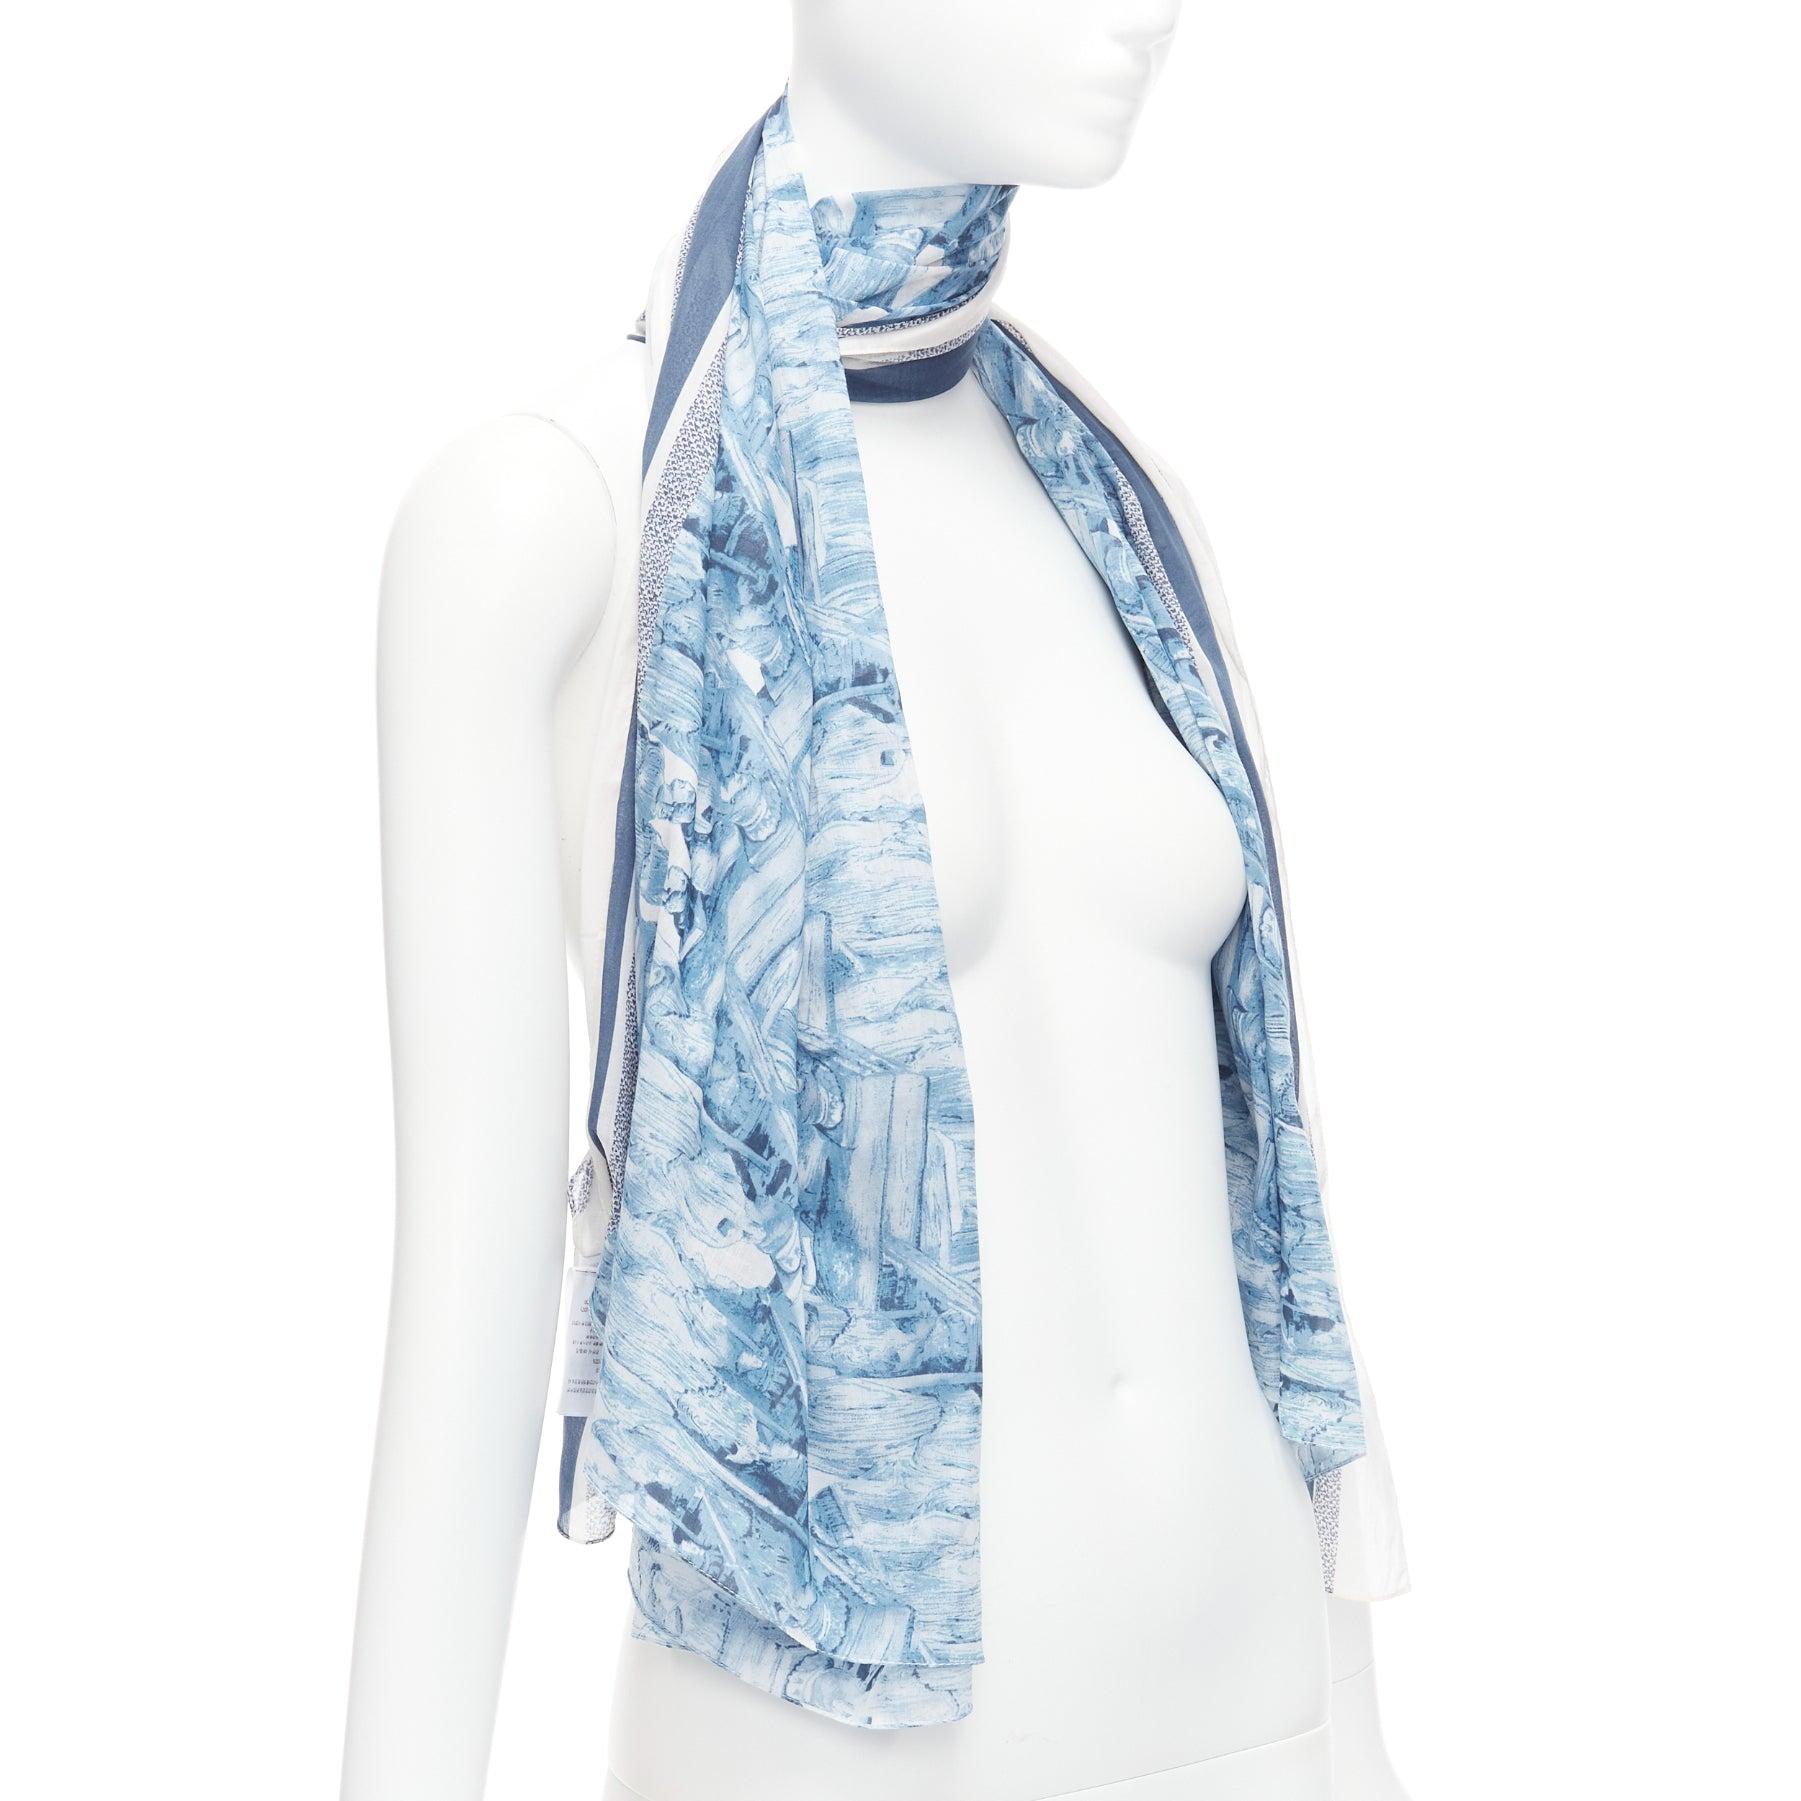 CHRISTIAN DIOR Riviera blue 100% cotton CD logo statues print square scarf
Reference: AAWC/A00559
Brand: Dior
Designer: Maria Grazia Chiuri
Collection: Riviera
Material: Cotton
Color: White, Blue
Pattern: Abstract
Extra Details: CHRISTIAN DIOR logo